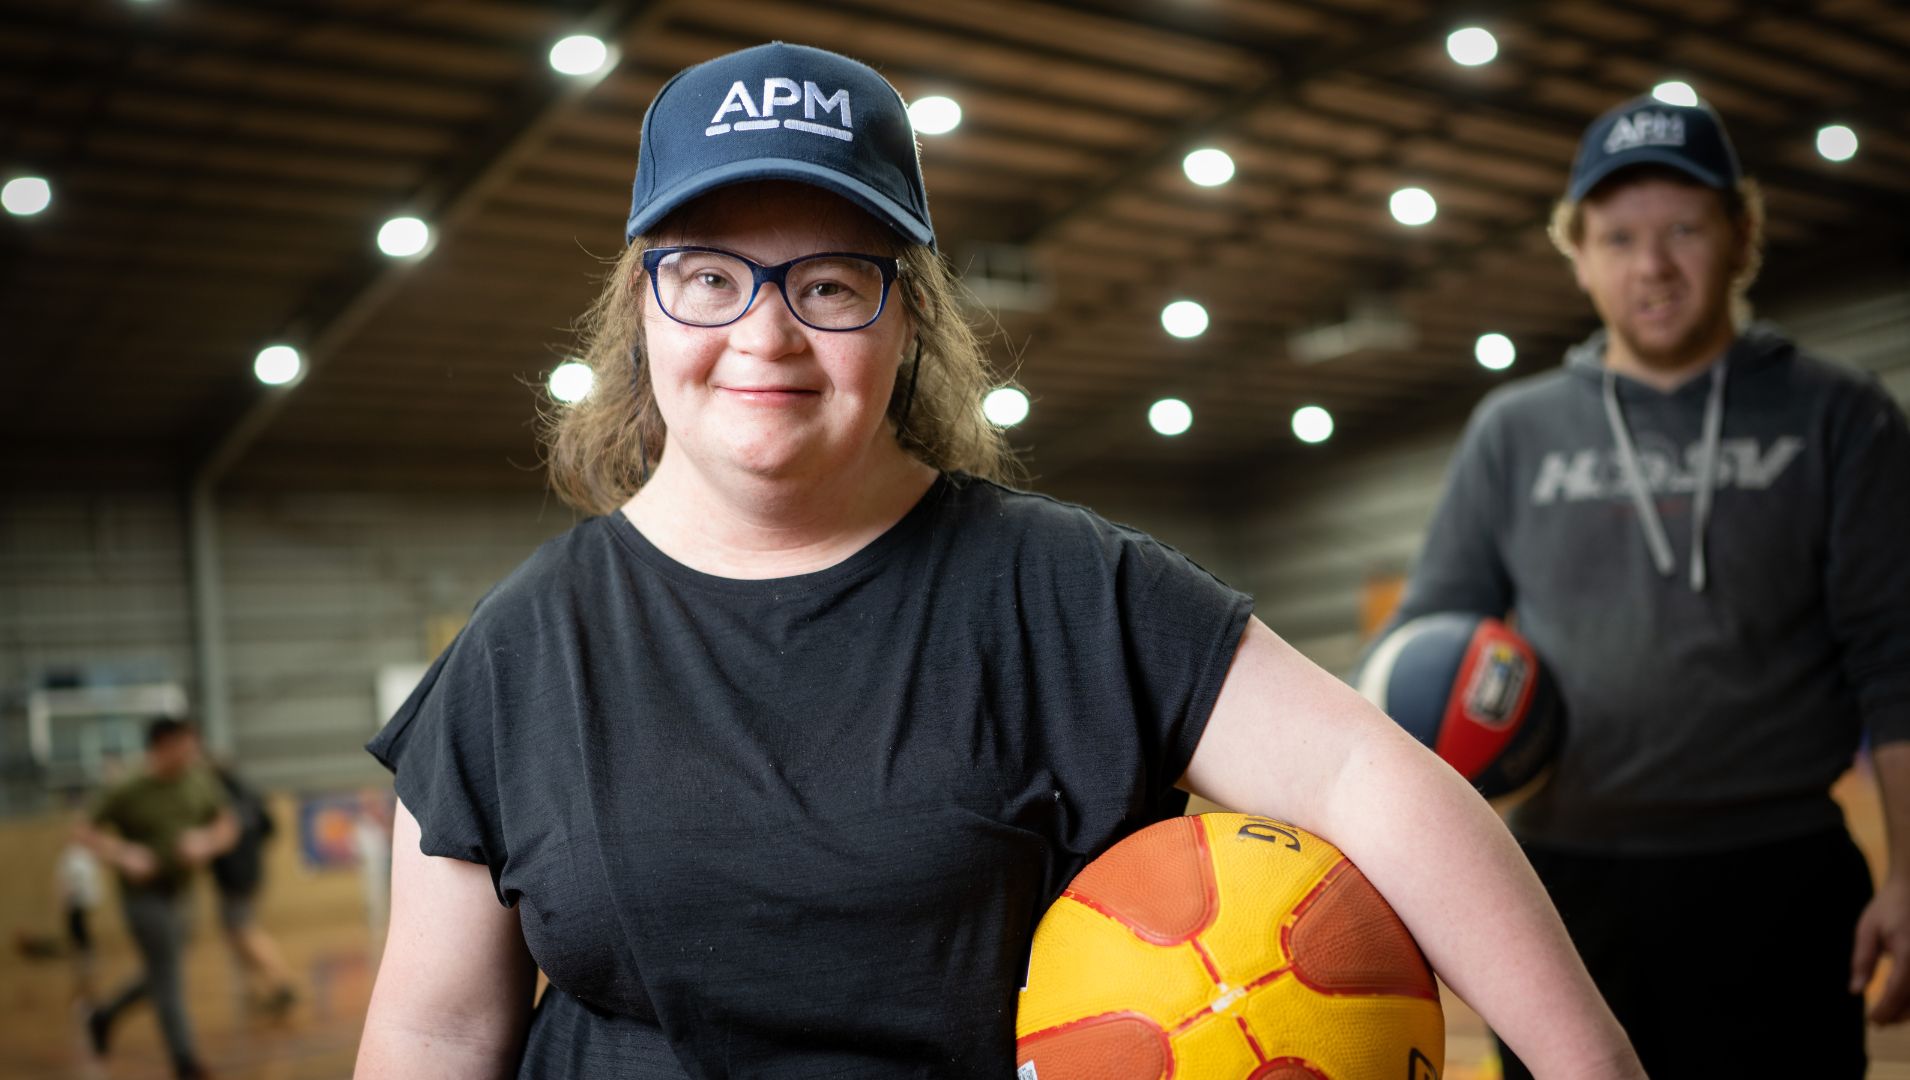 Girl with disability smiling with basketball and APM cap